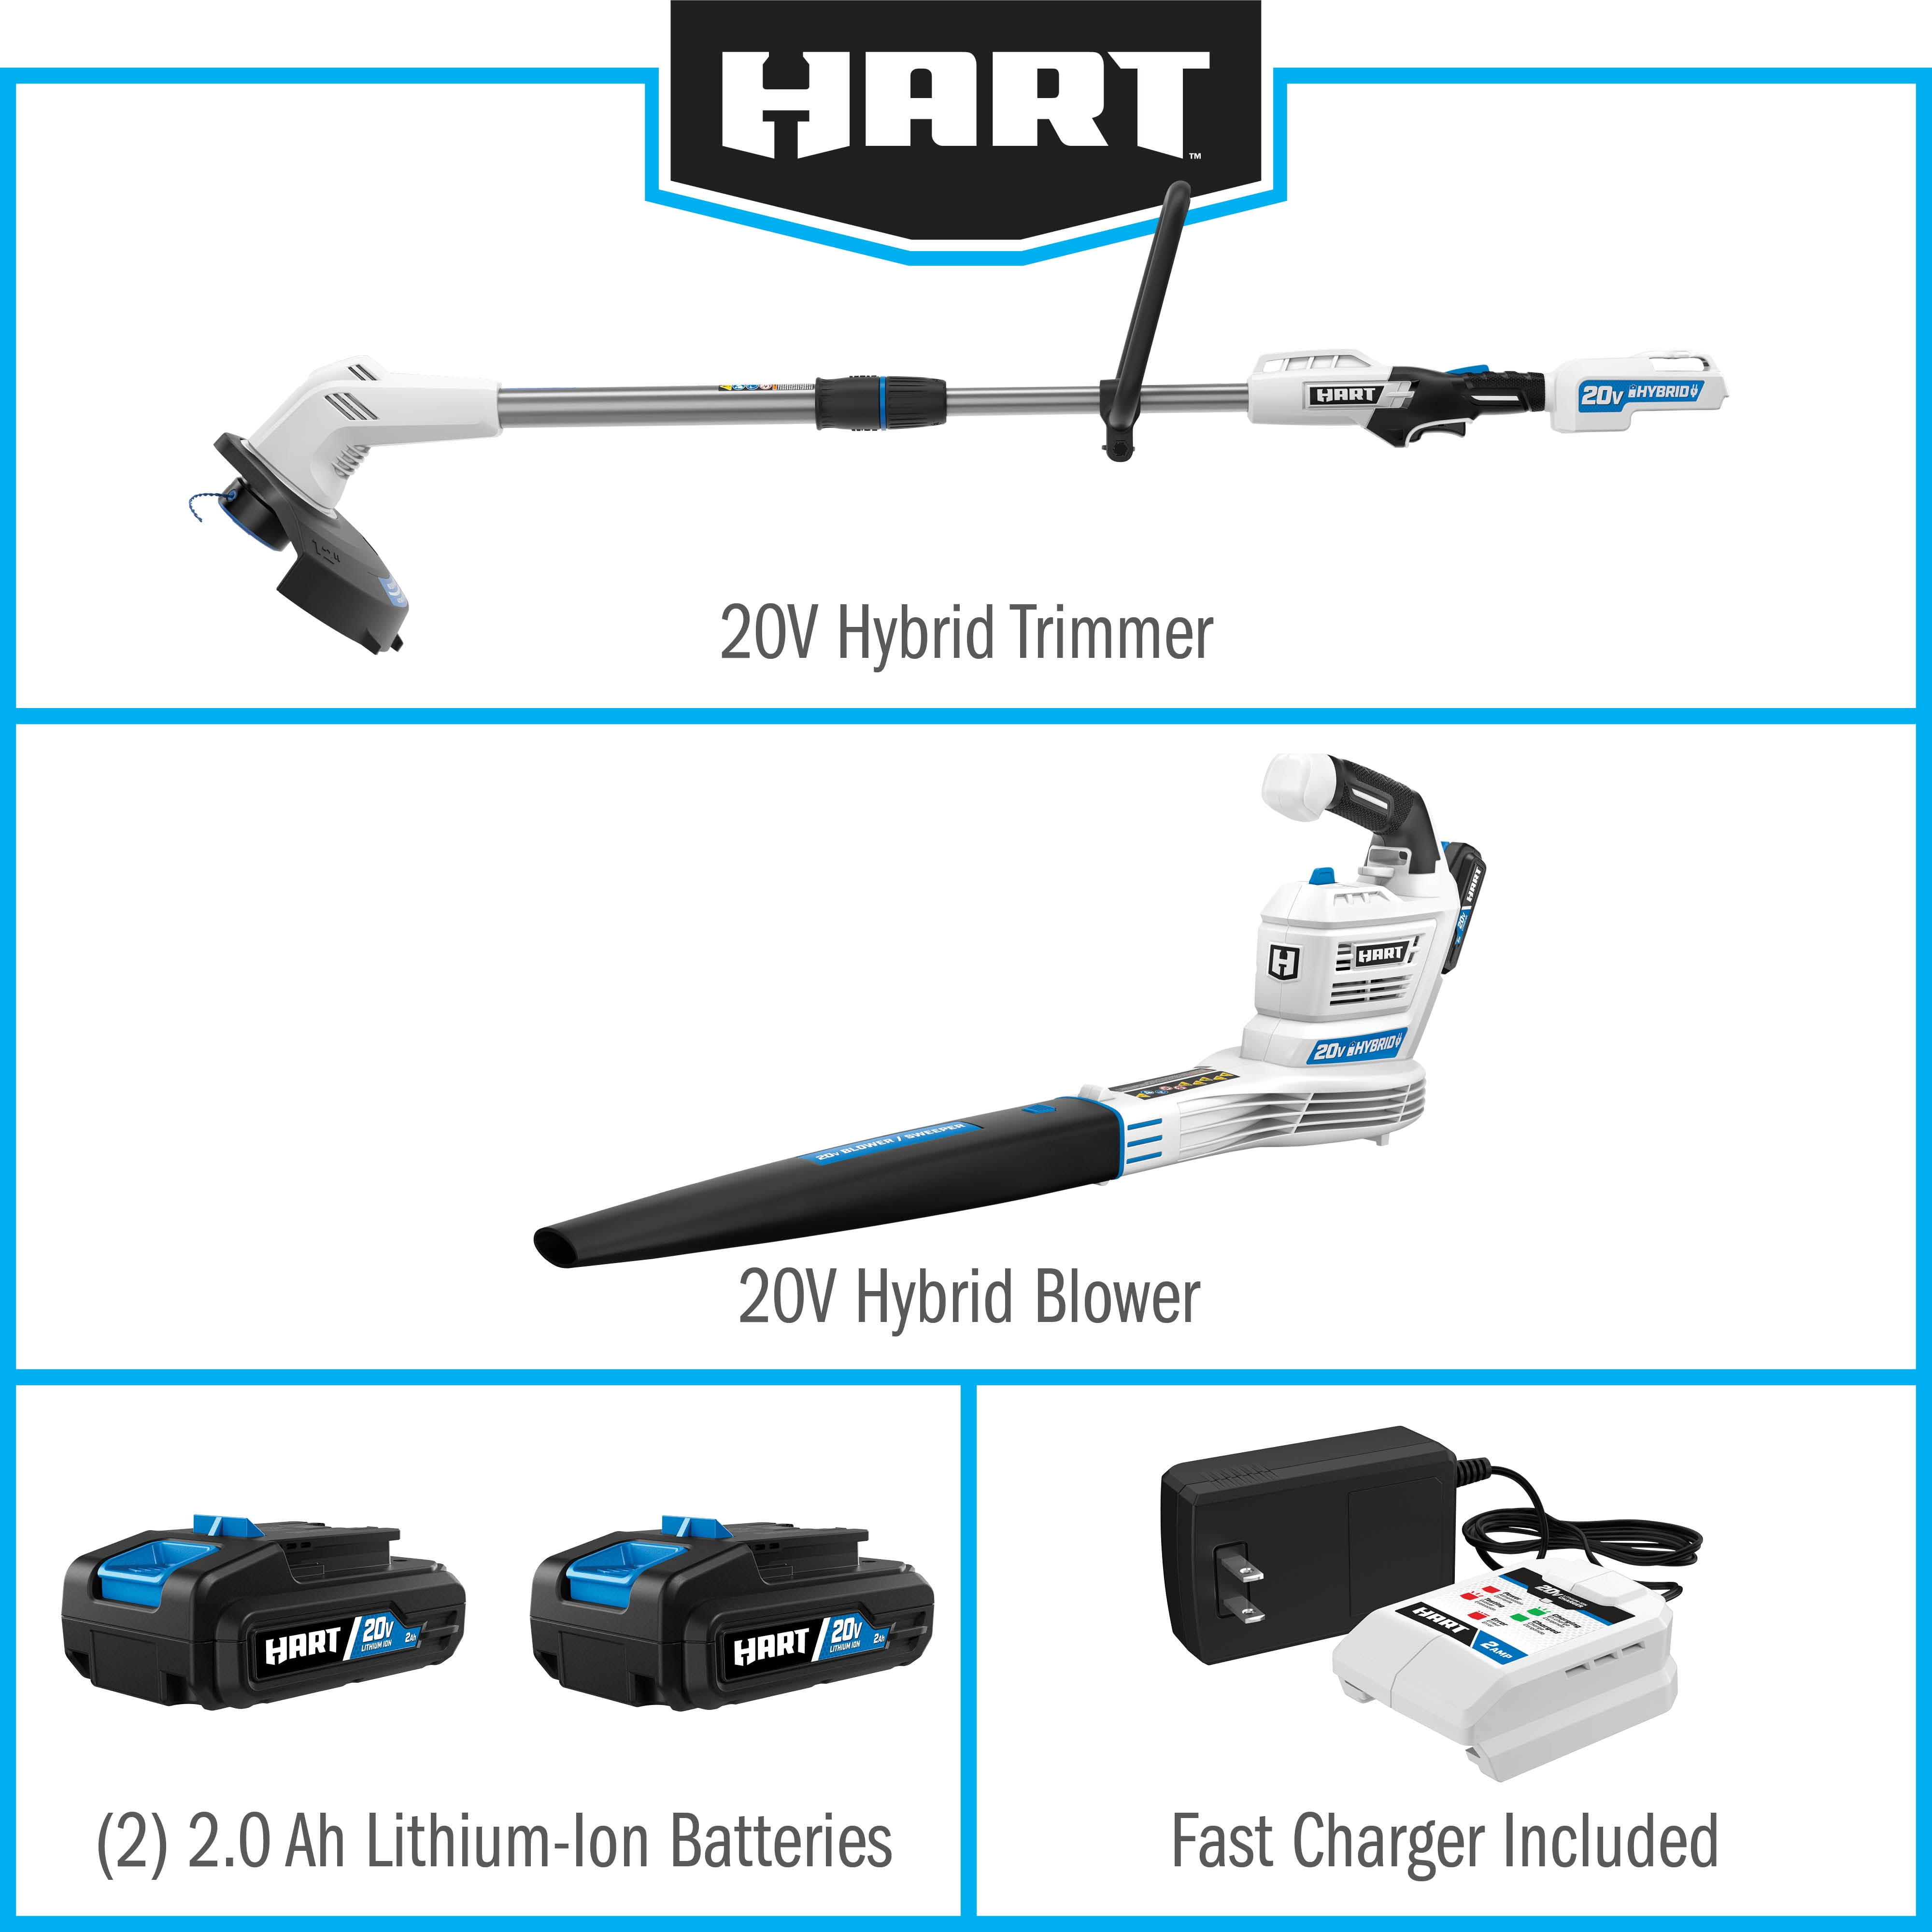 hart blower and trimmer